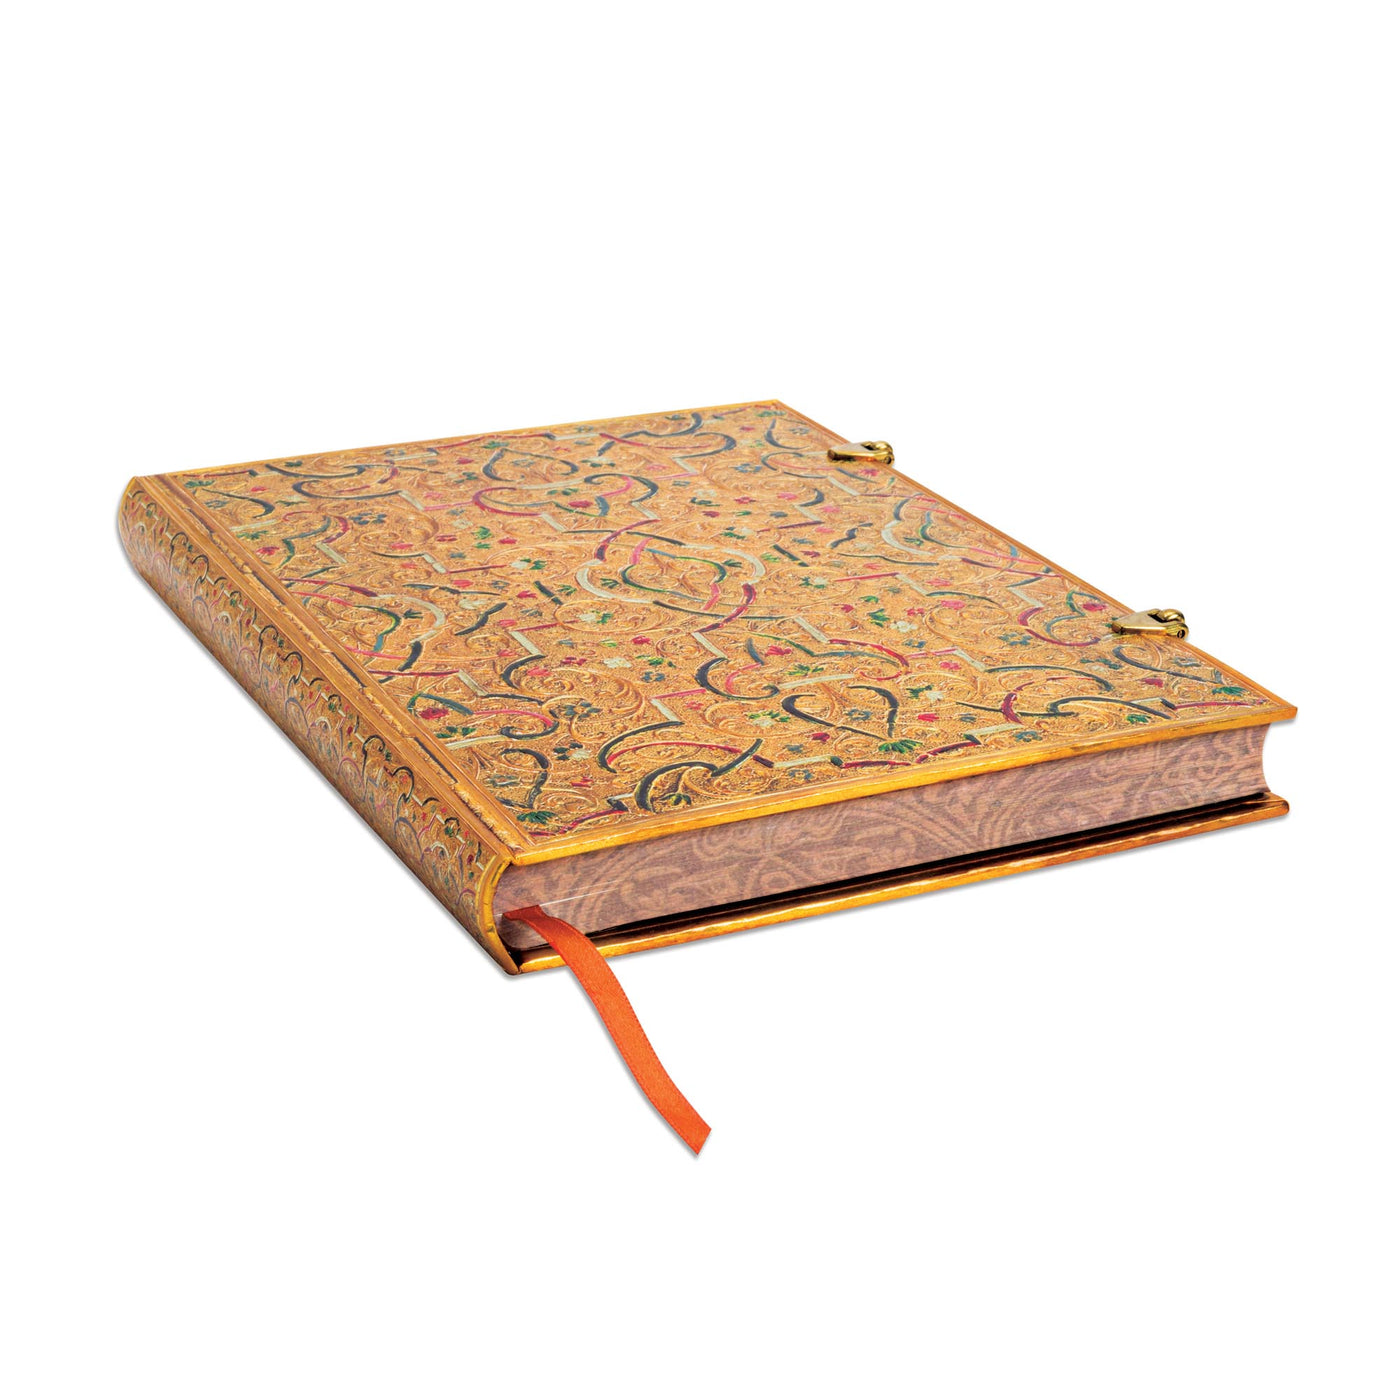 Paperblanks Gold Inlay Ultra 7 x 9 Inch Lined Journal